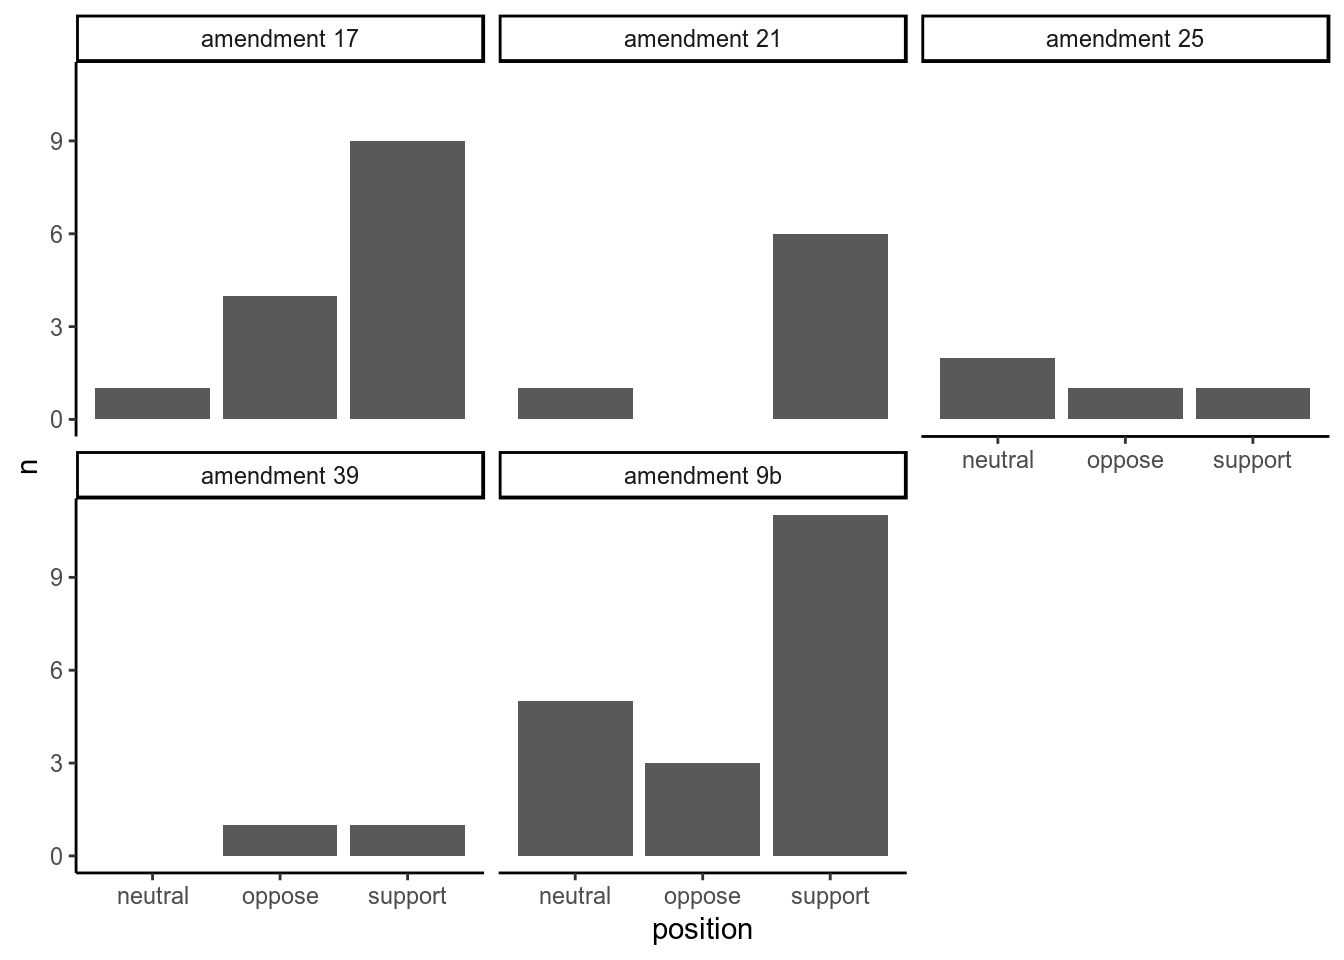 Measuring support versus opposition for each amendment based on sentences containing the word 'amendment'